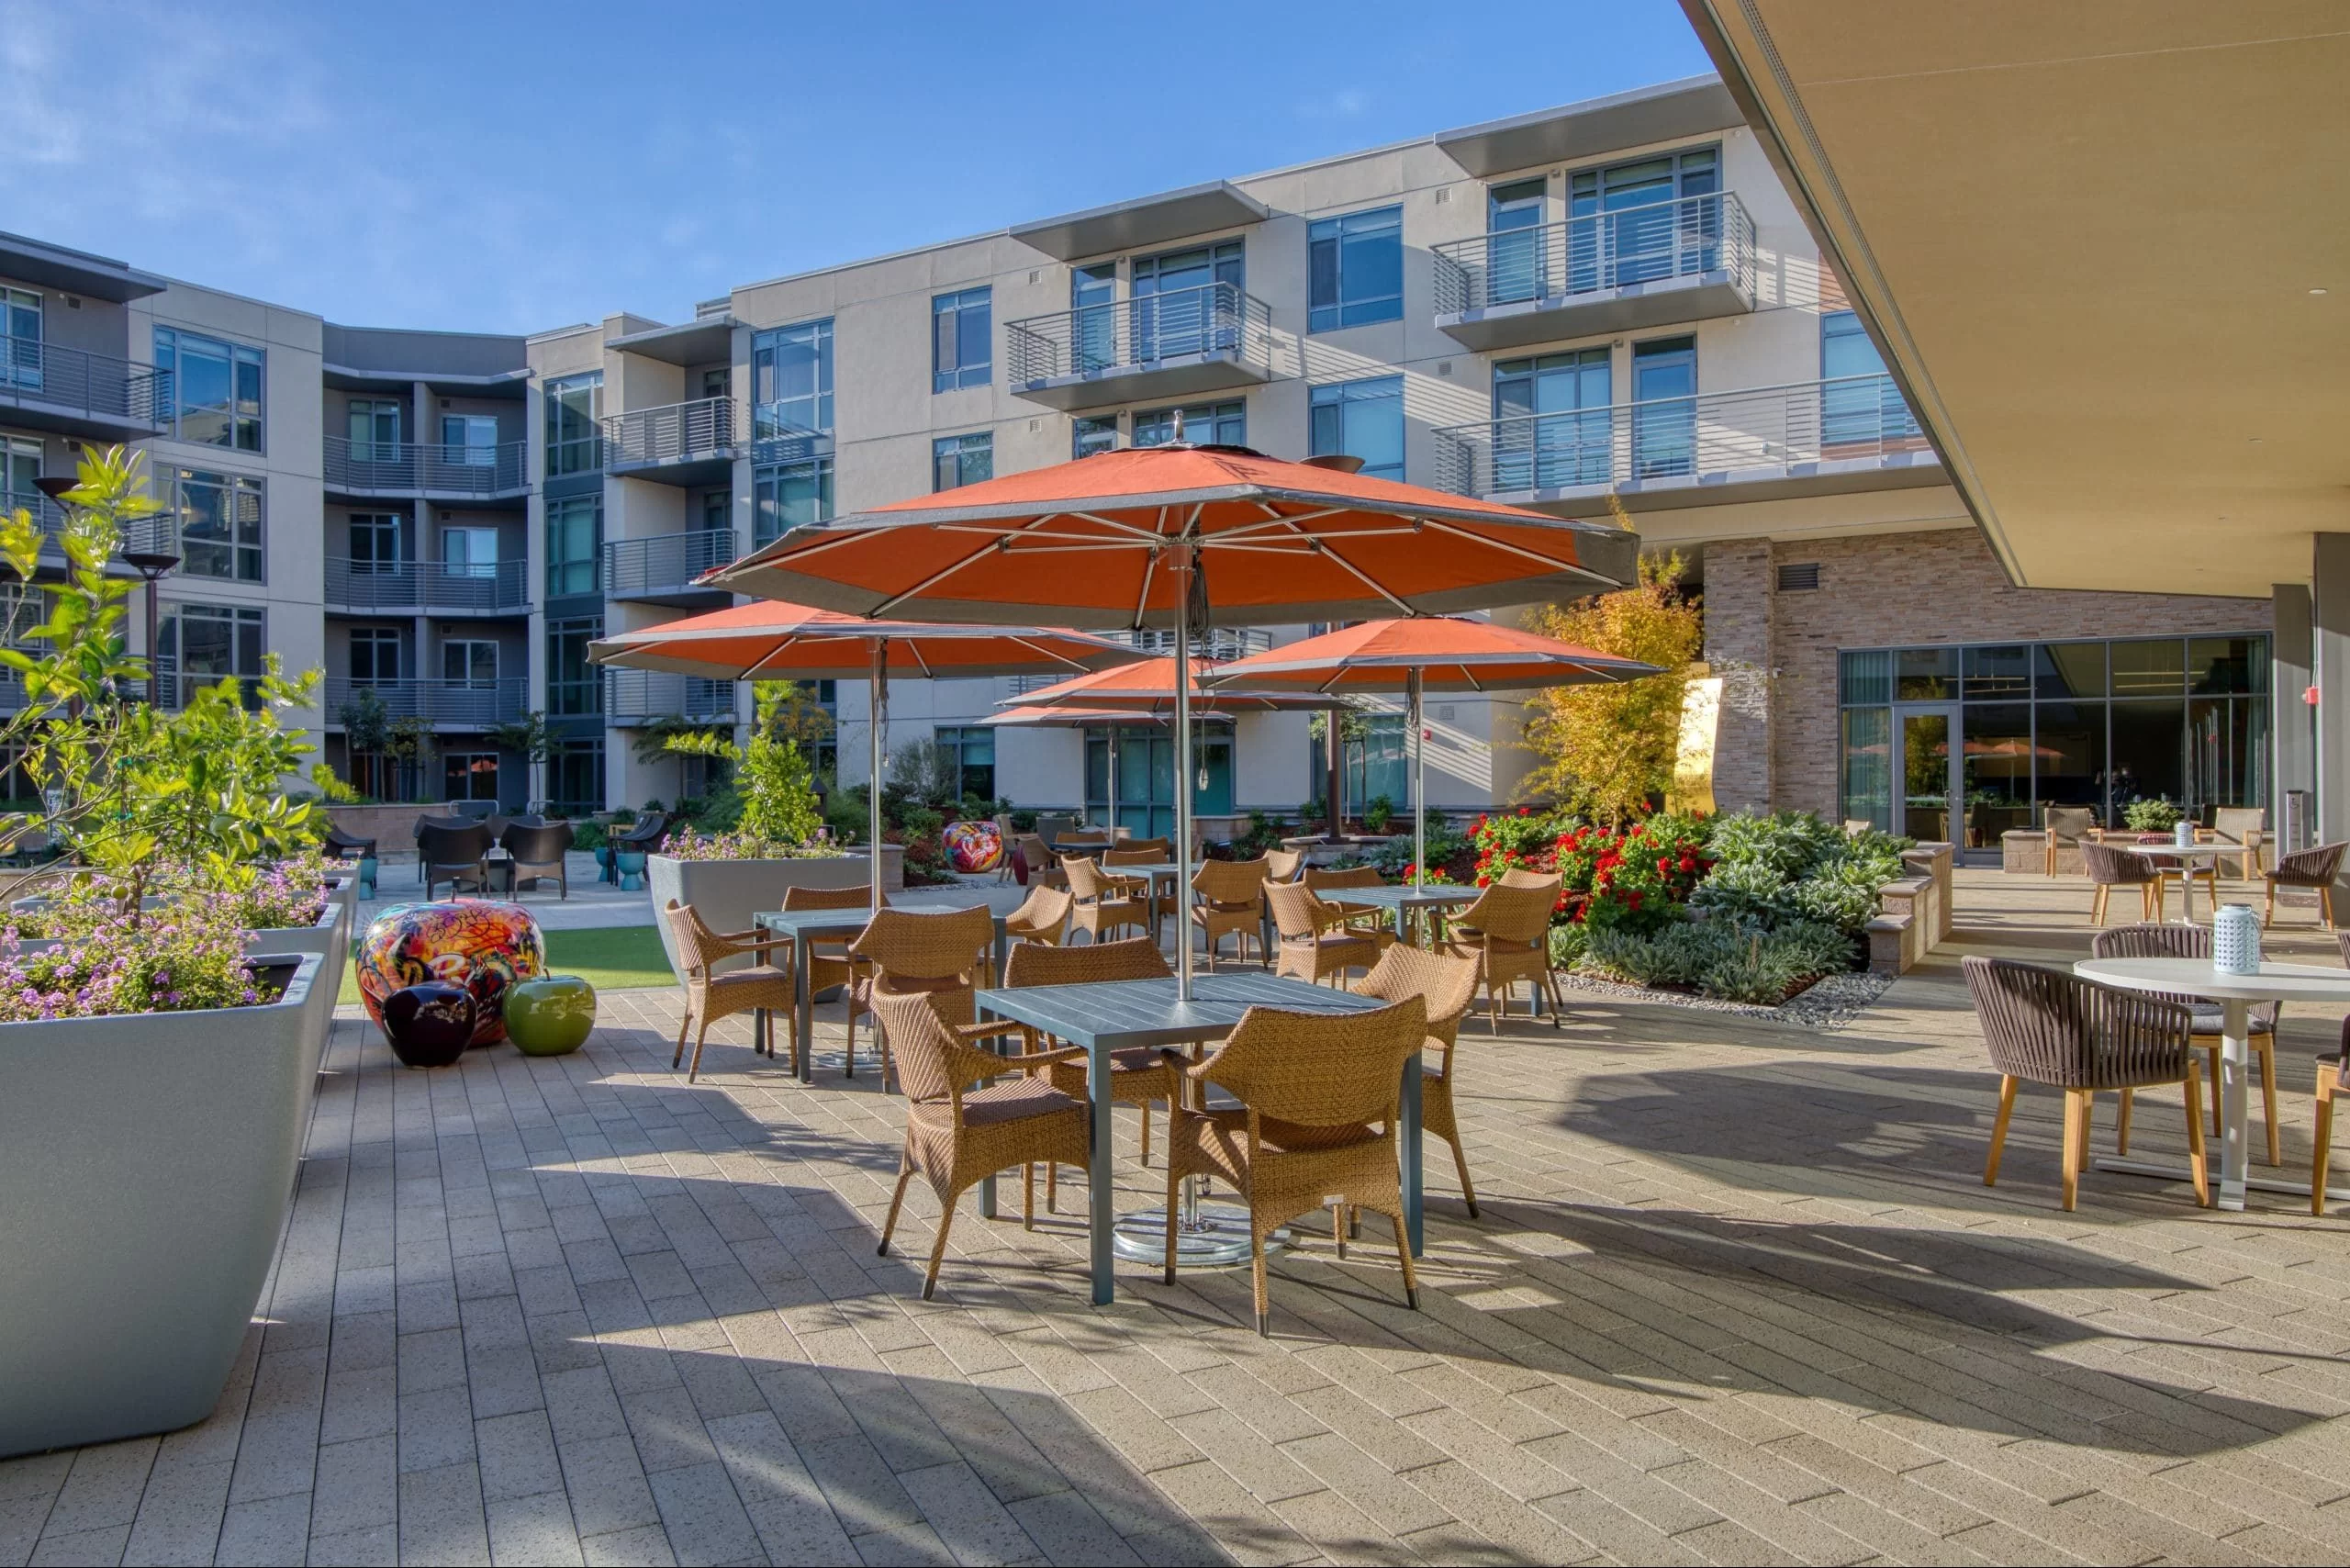 viamonte at walnut creek courtyard with outdoor seating.